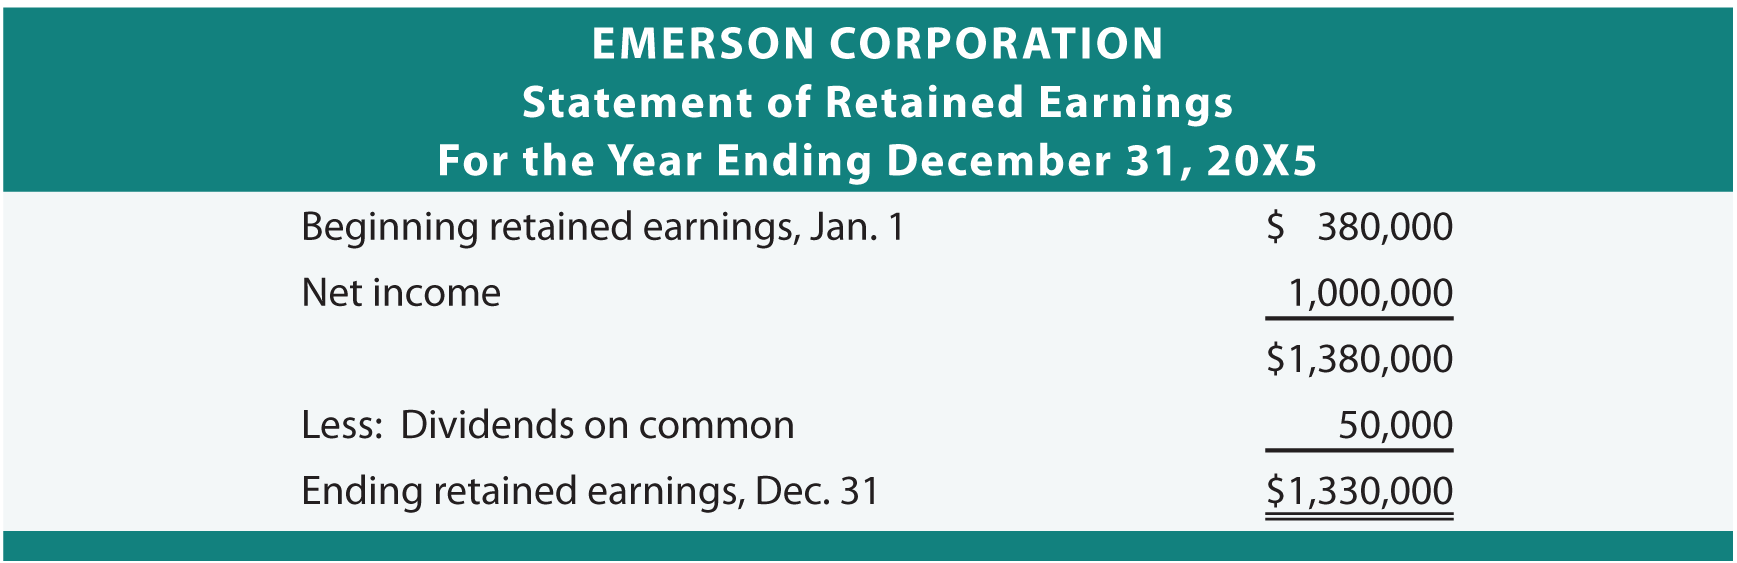 Emerson Corporation Statement of Retained Earnings